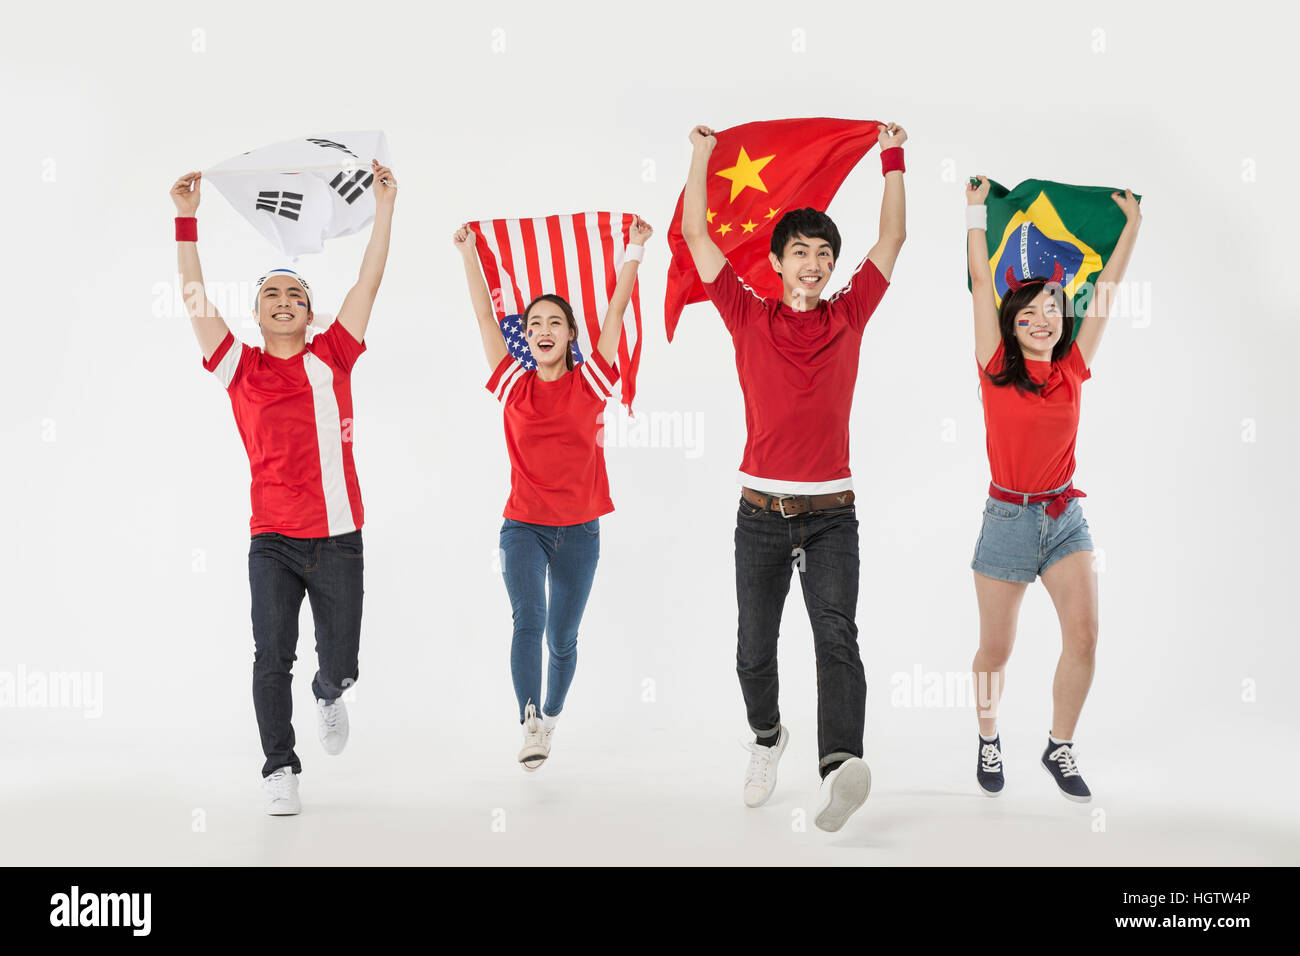 Young smiling cheerleaders running holding national flags Stock Photo